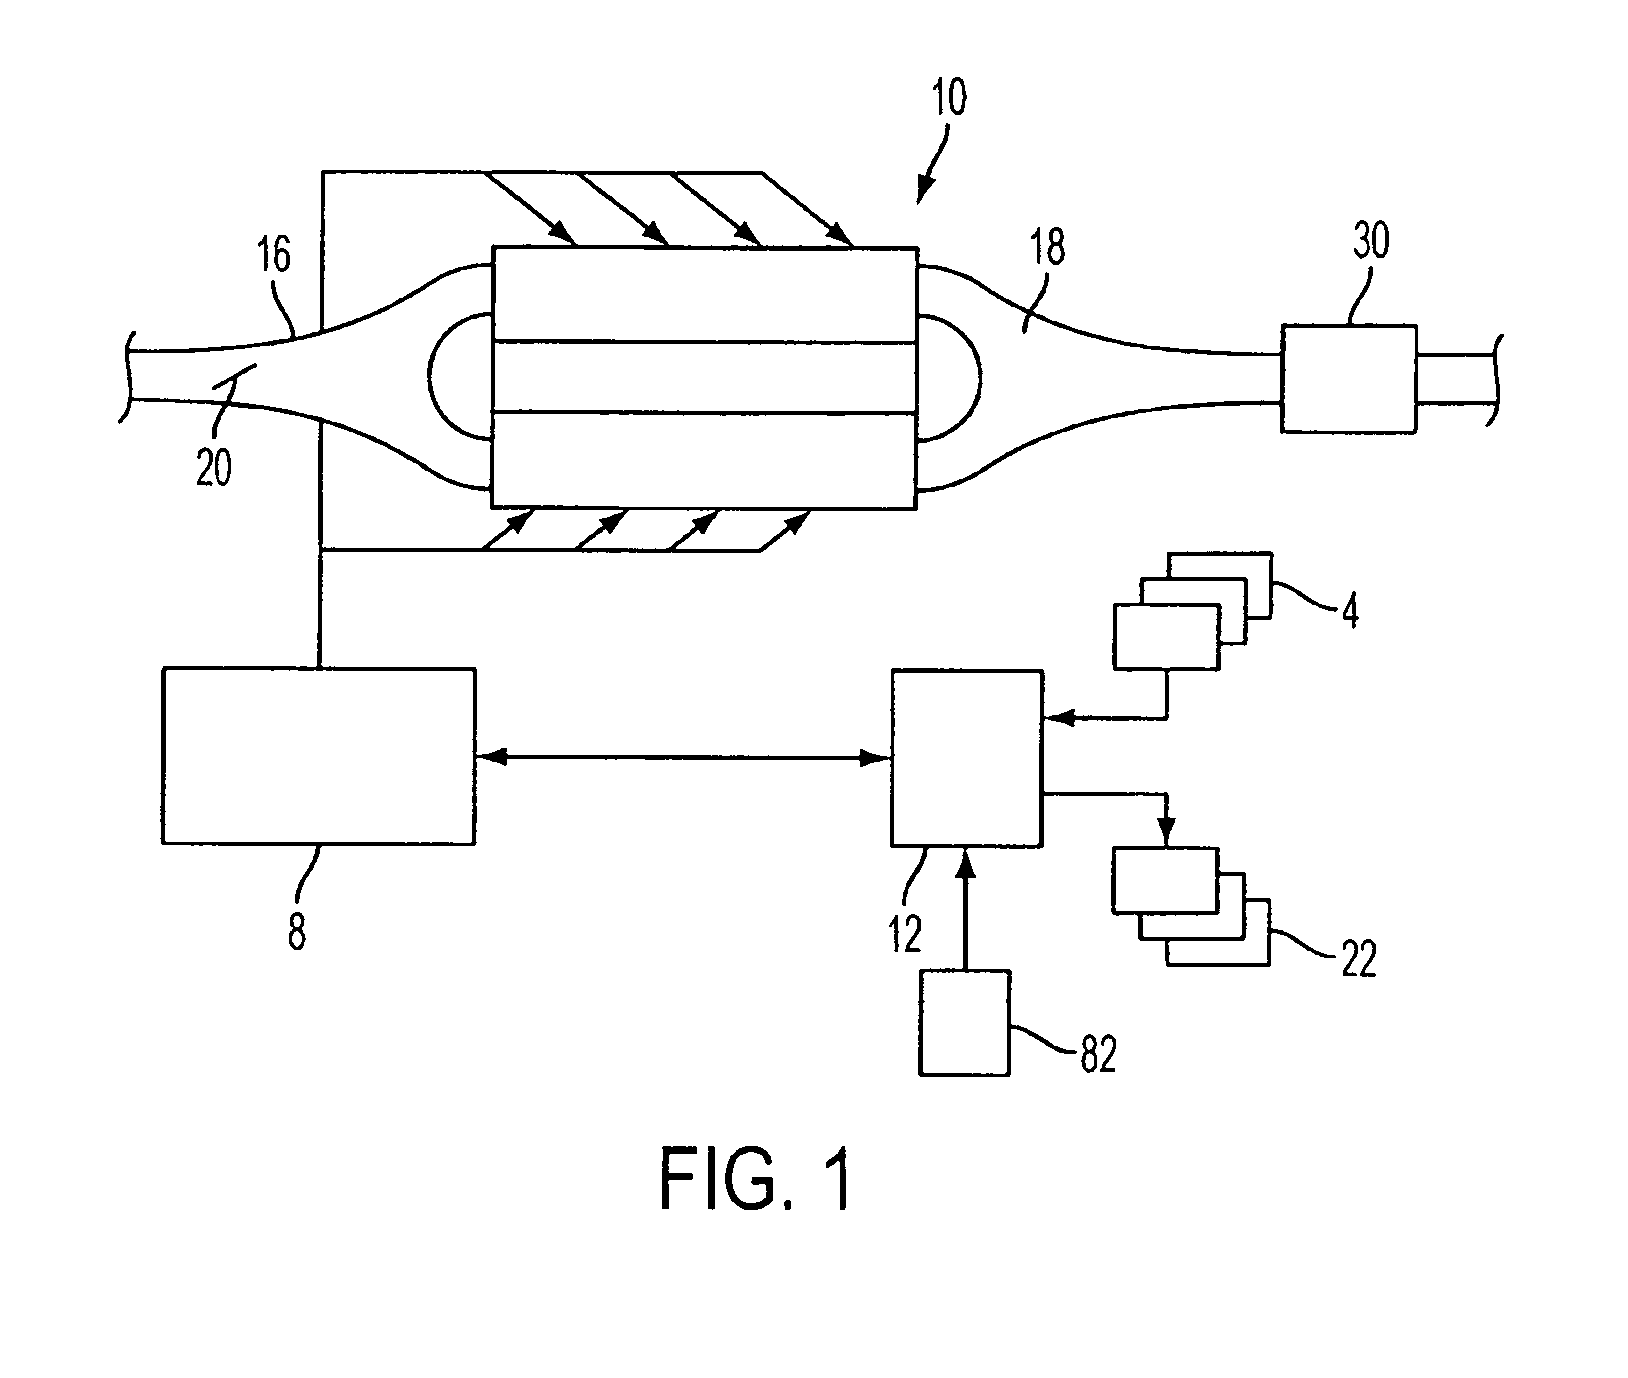 Flex-fuel variable displacement engine control system and method